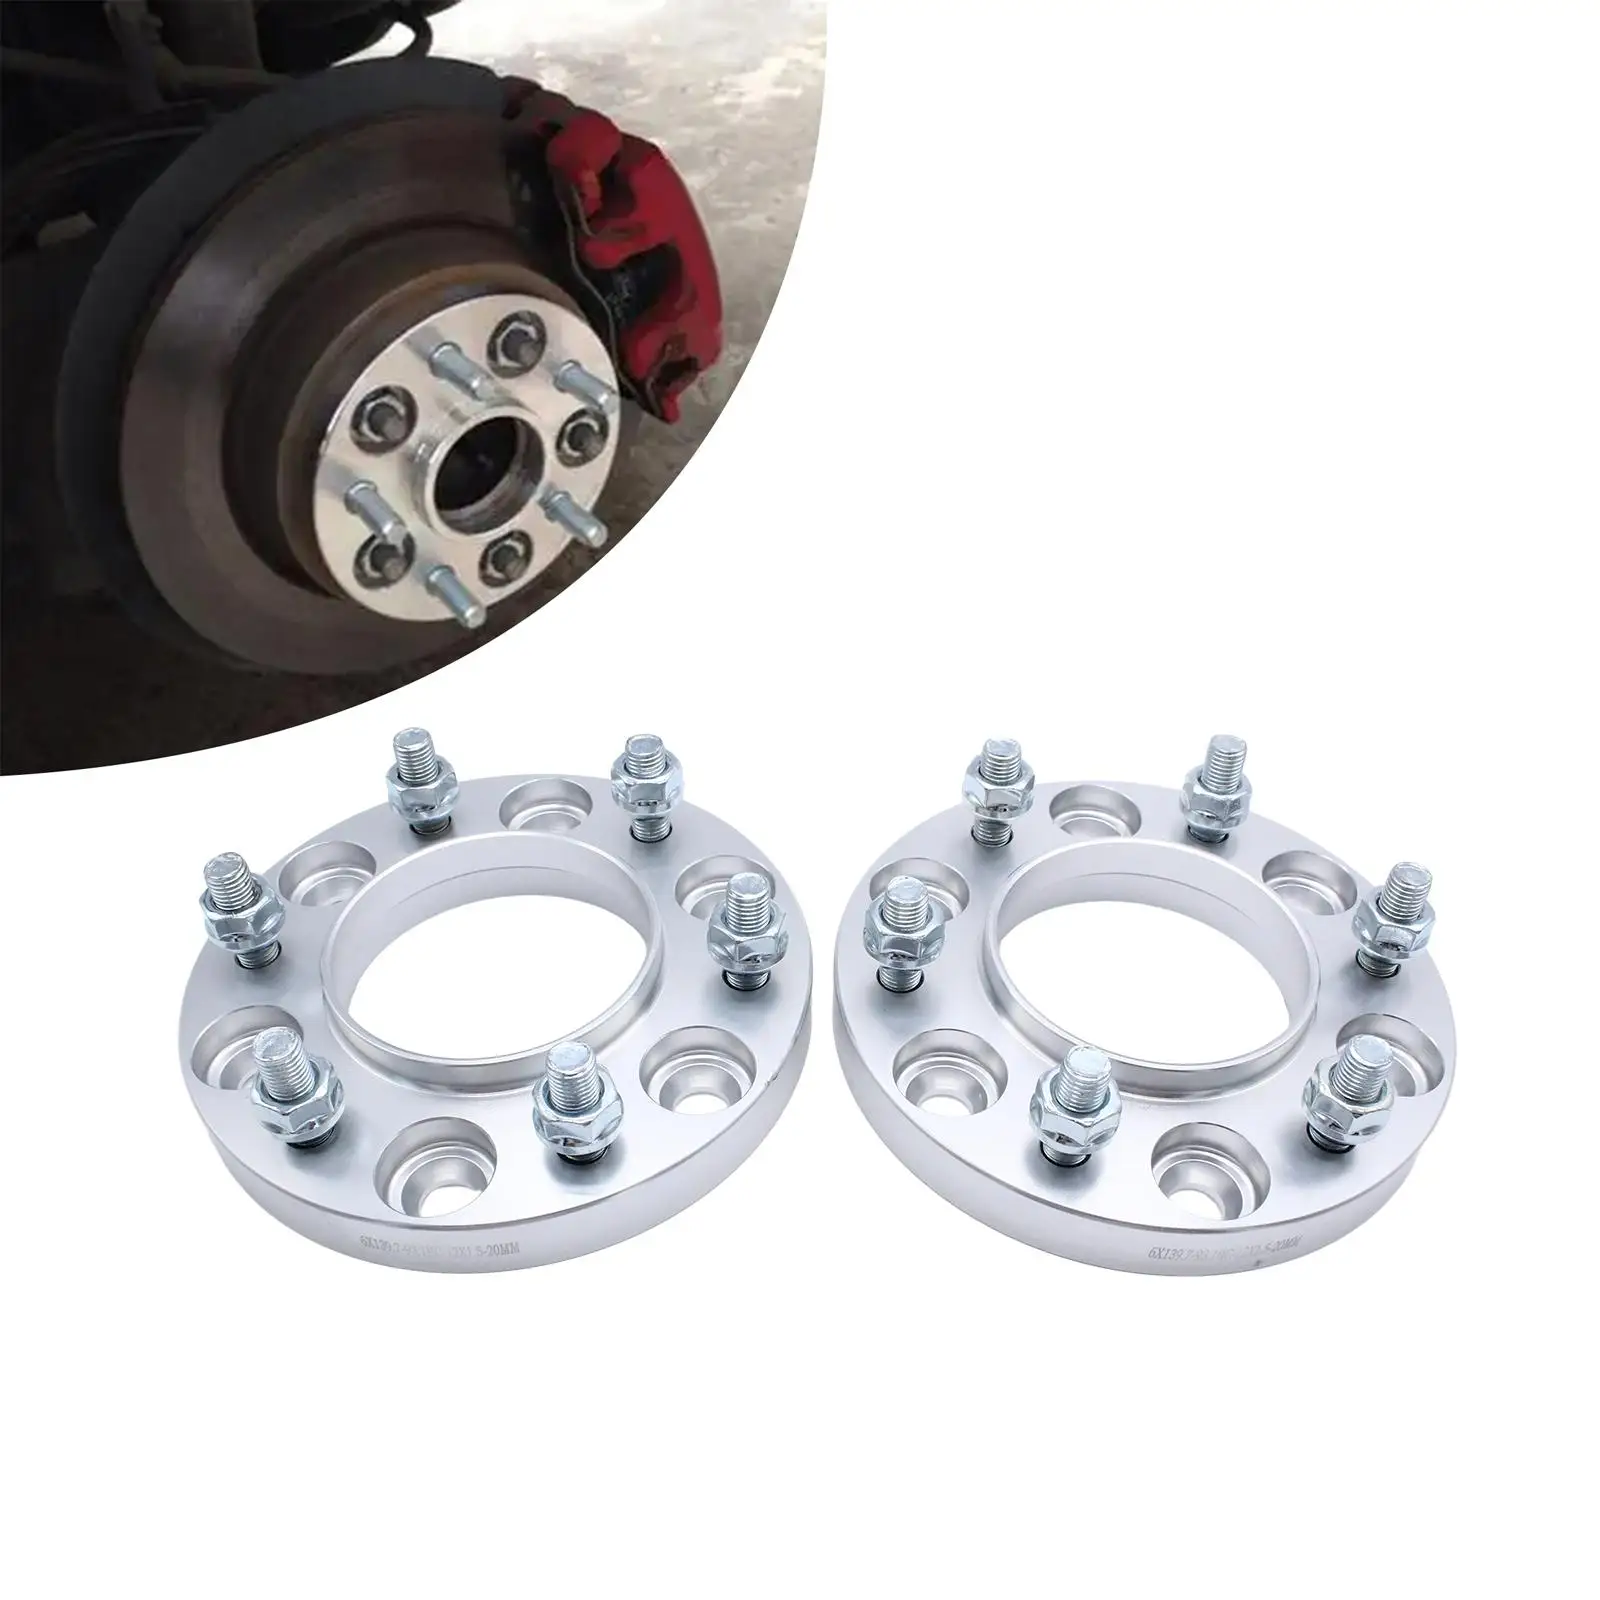 2 Pieces Hub Centric Wheel Spacers 20mm Thickness for Ranger Durable